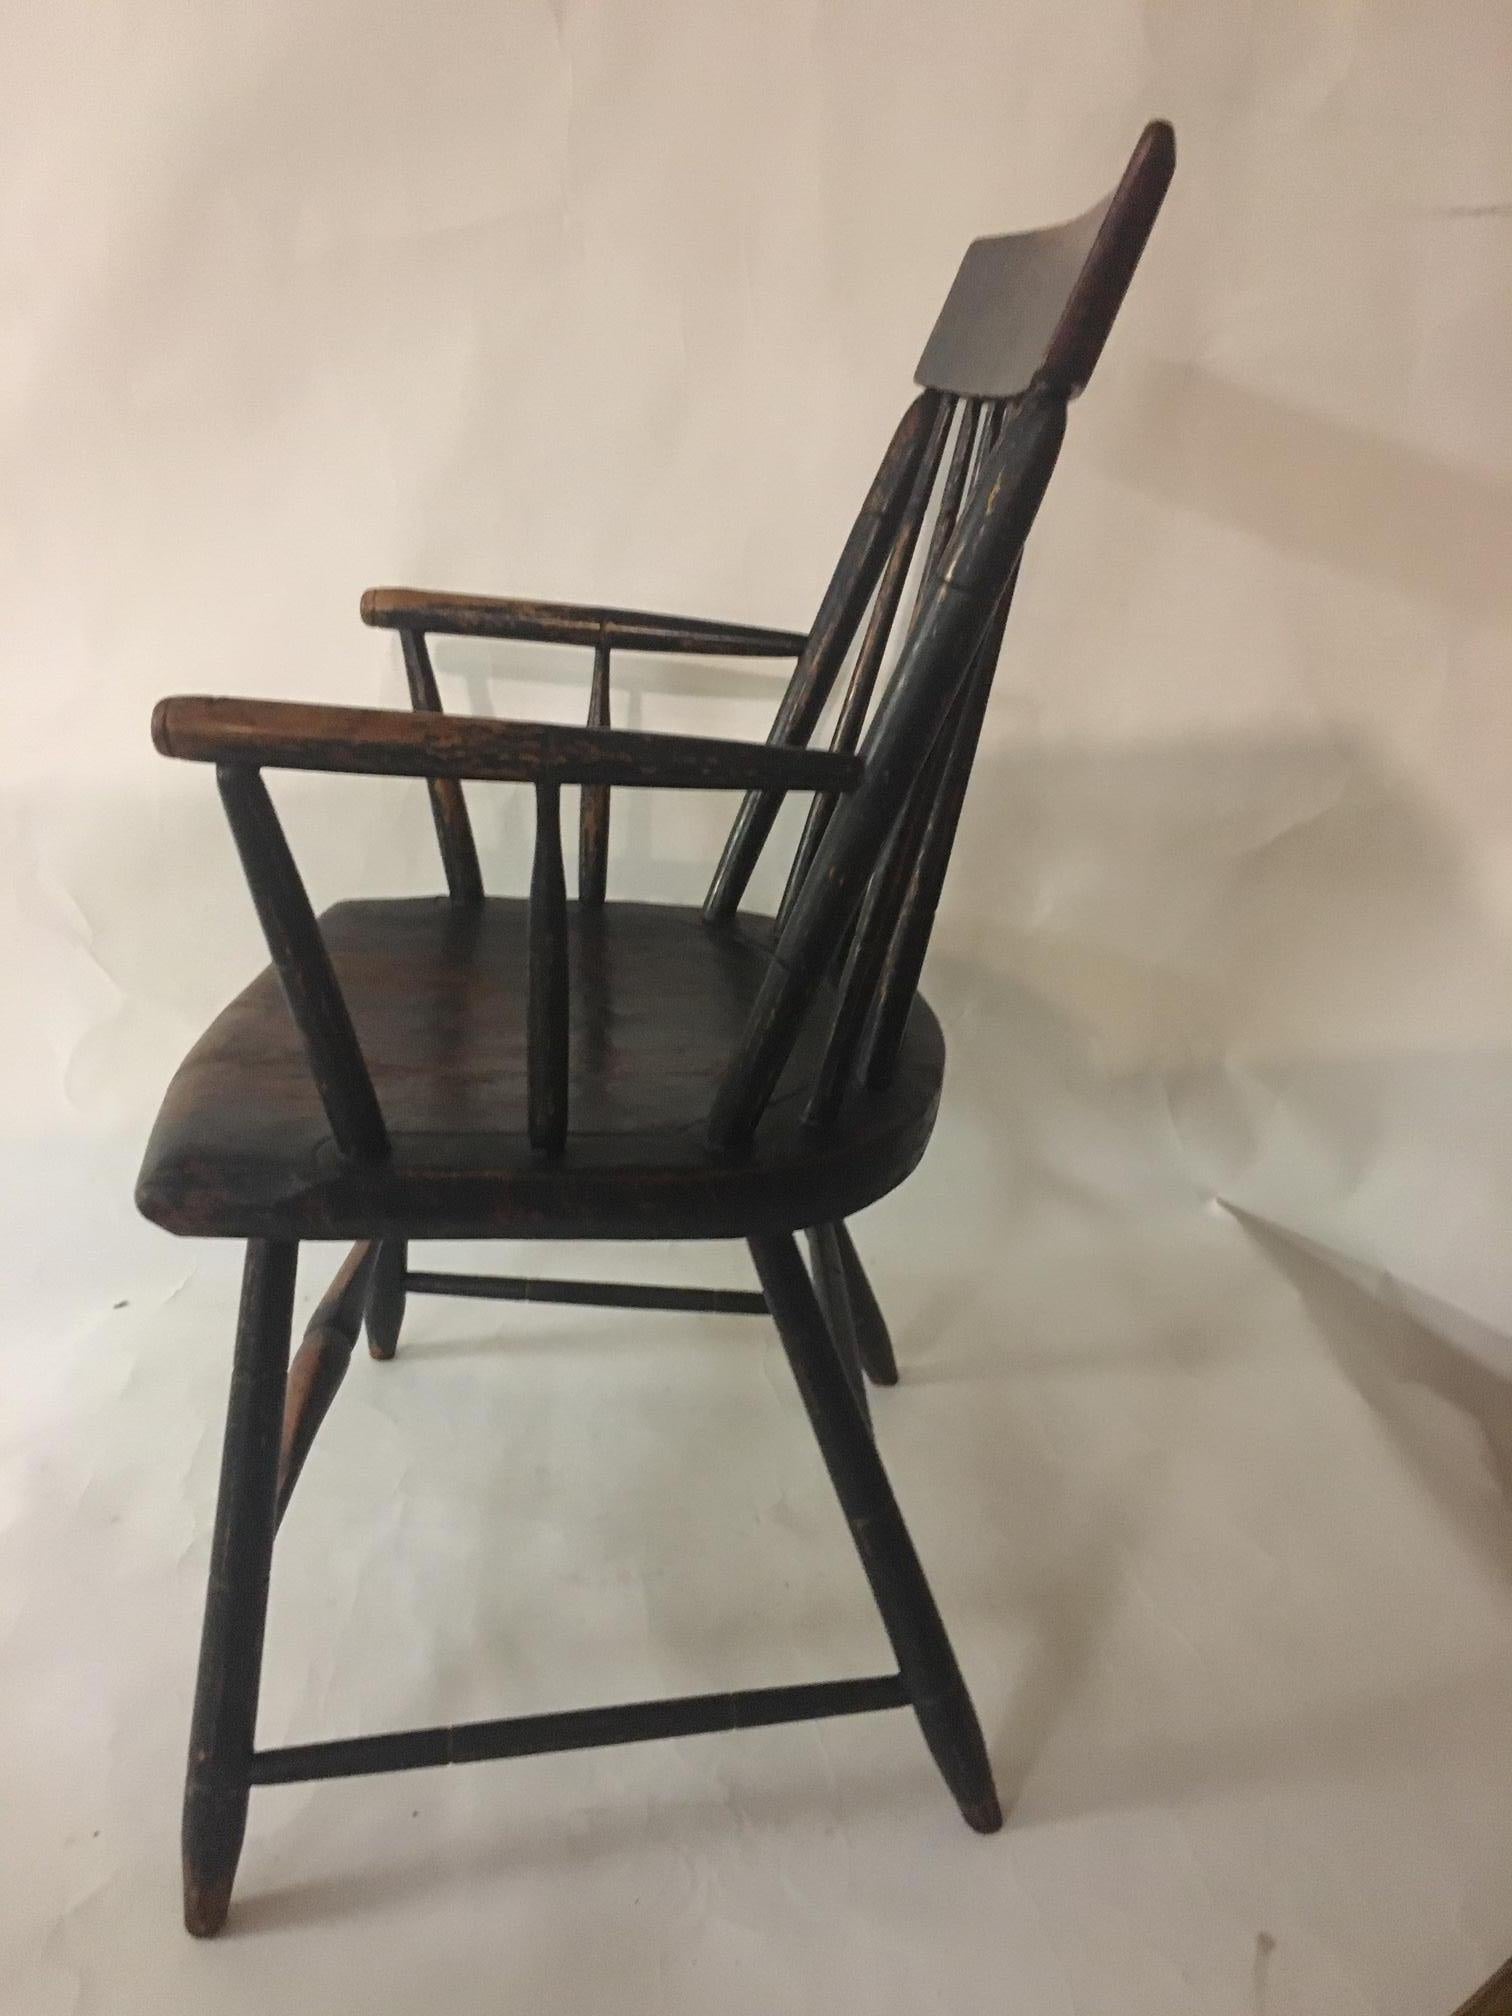 19th Century Windsor Armchair in Petite Size with Original Milk Paint 3